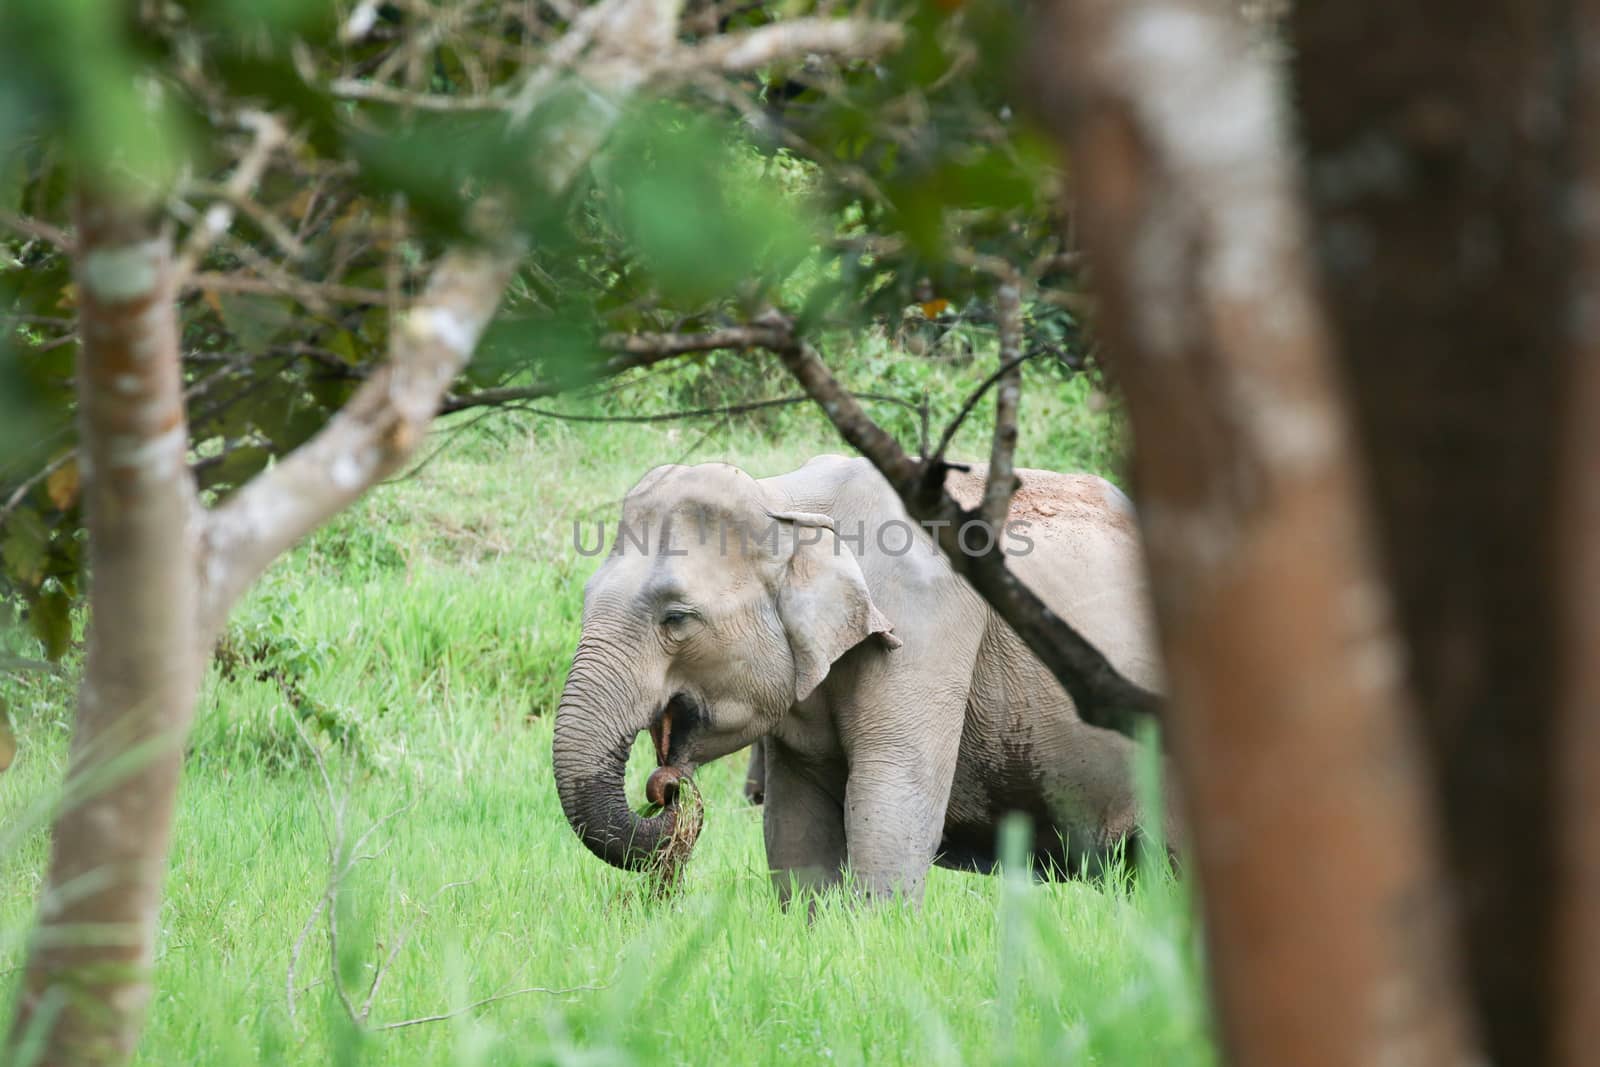 Asian elephants are the largest living land animals in Asia .Asian elephants are highly intelligent and self-aware.